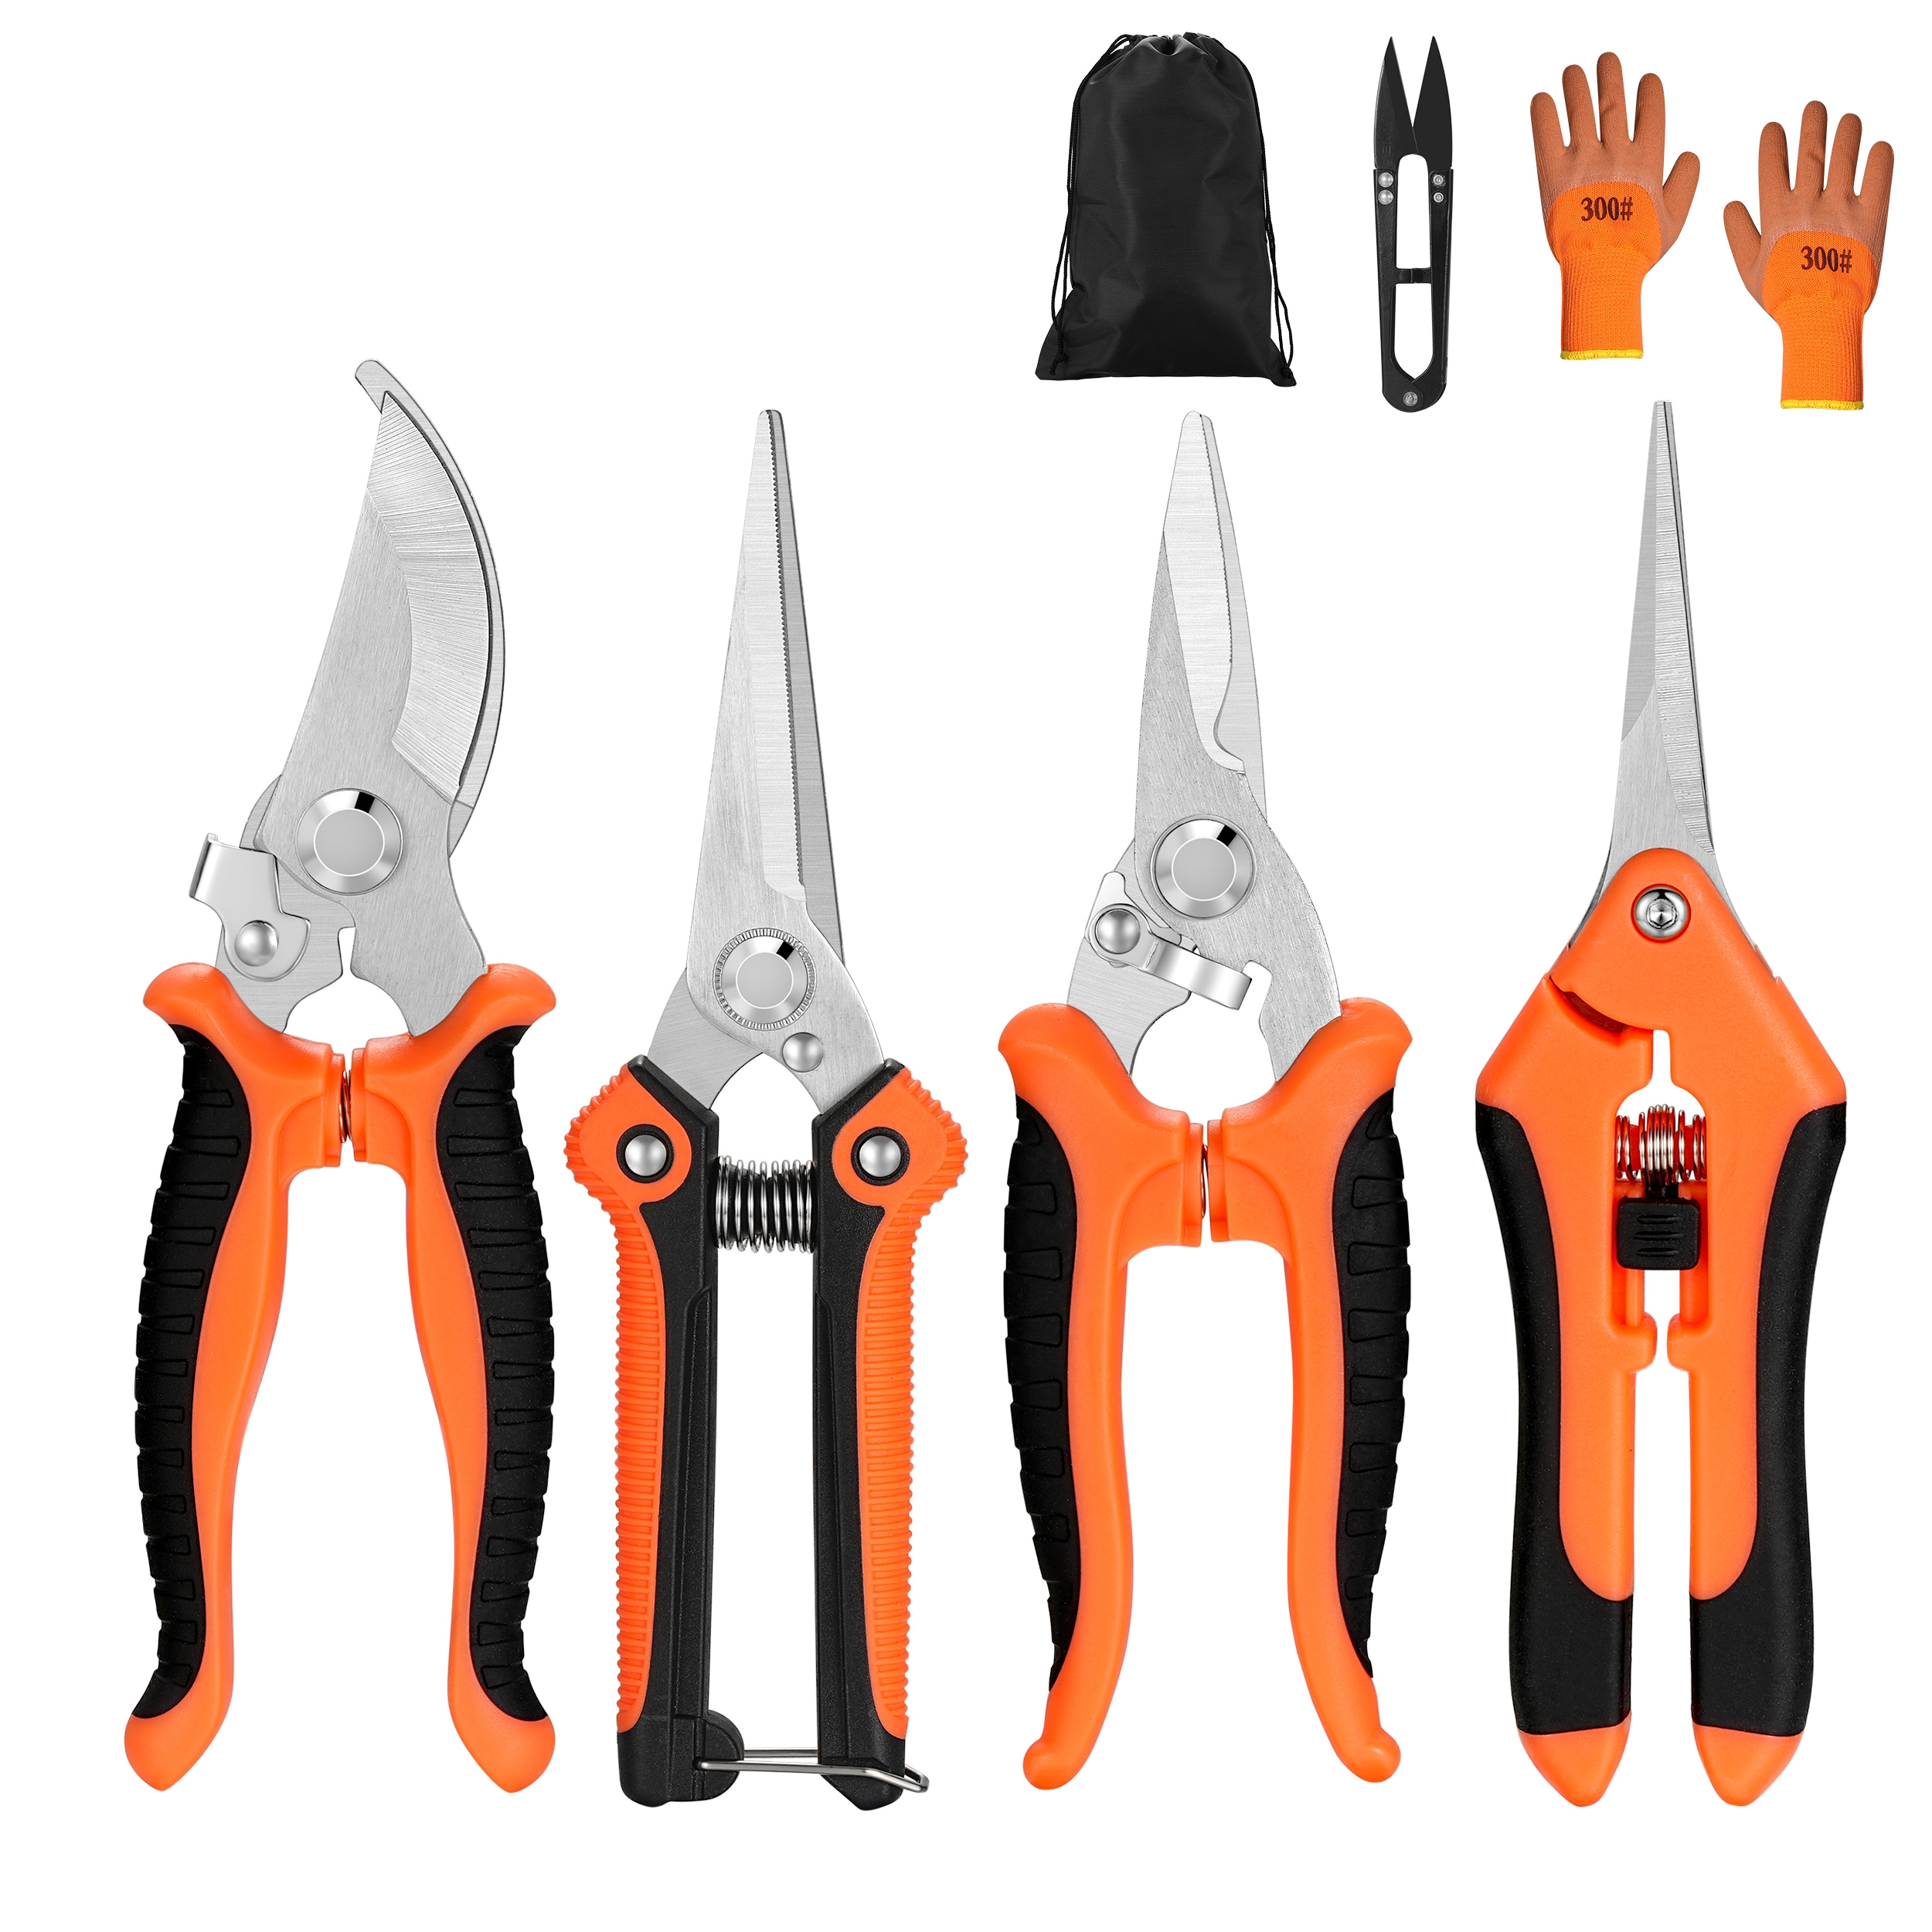 Pruner and Saw Garden Tool Set with Steel Blades and Non-Slip